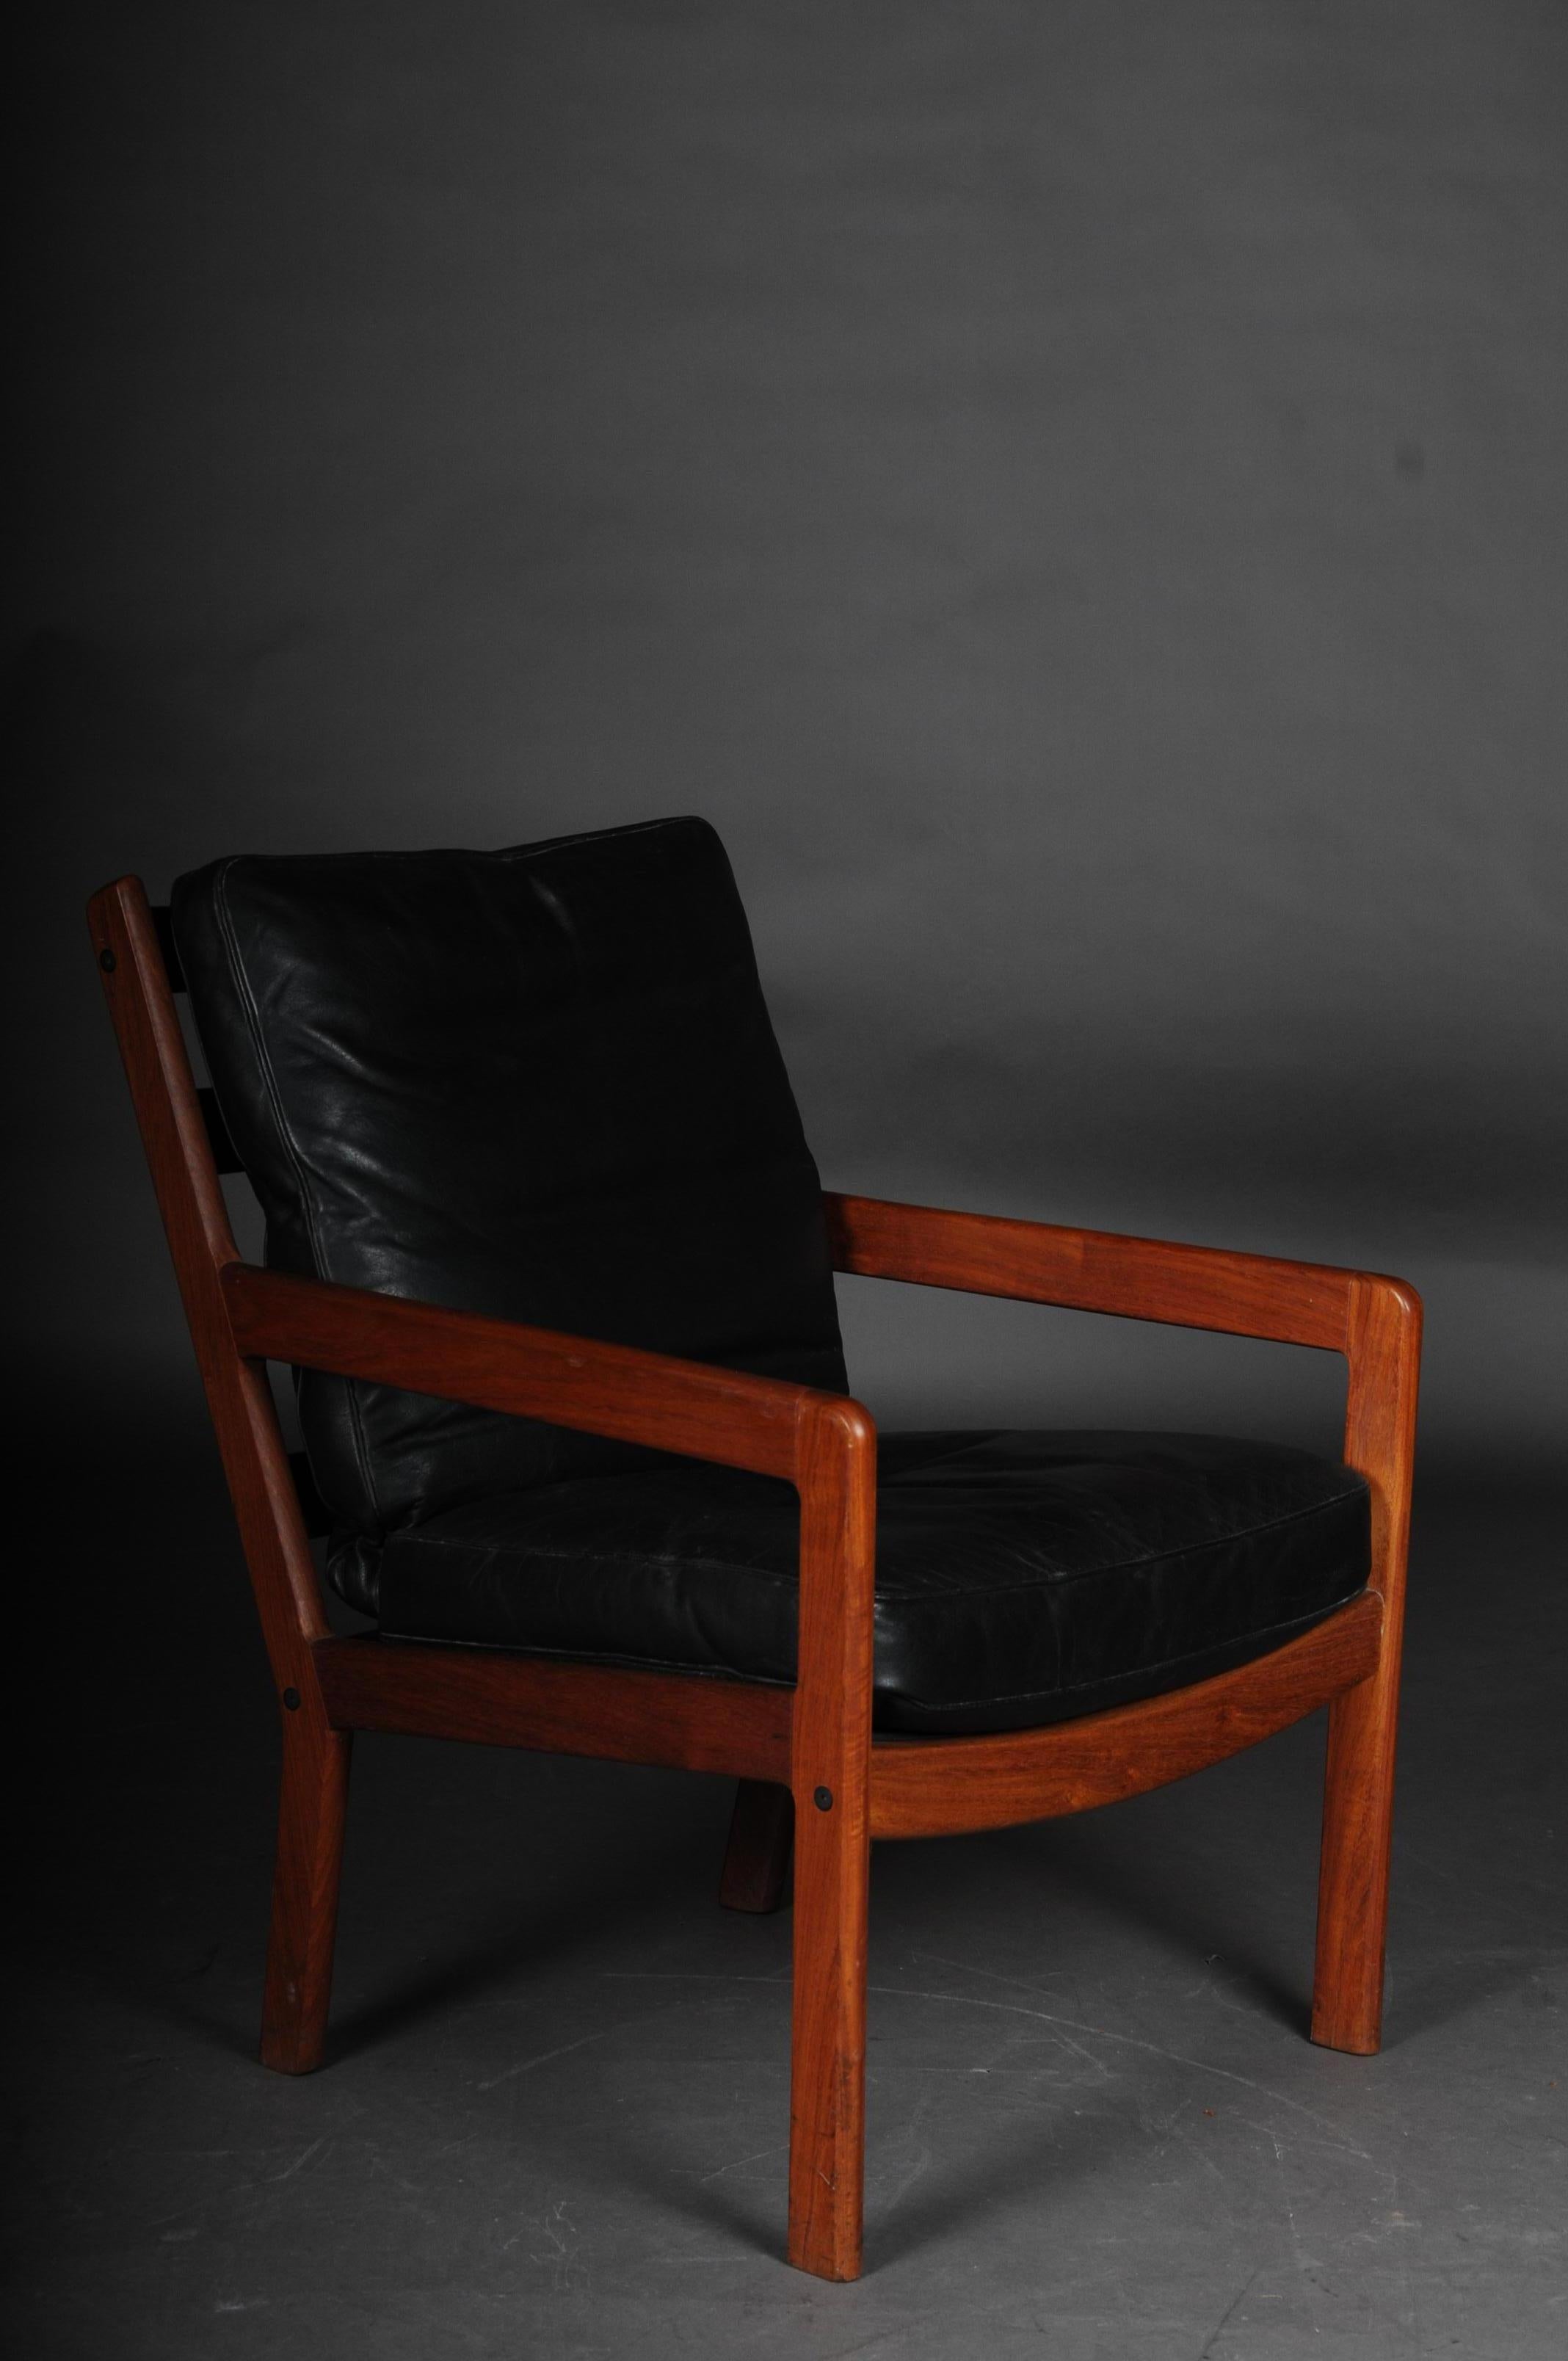 Mid-20th Century Pair of Vintage Teak Armchairs, Chairs, 1960s-1970s, Danish For Sale